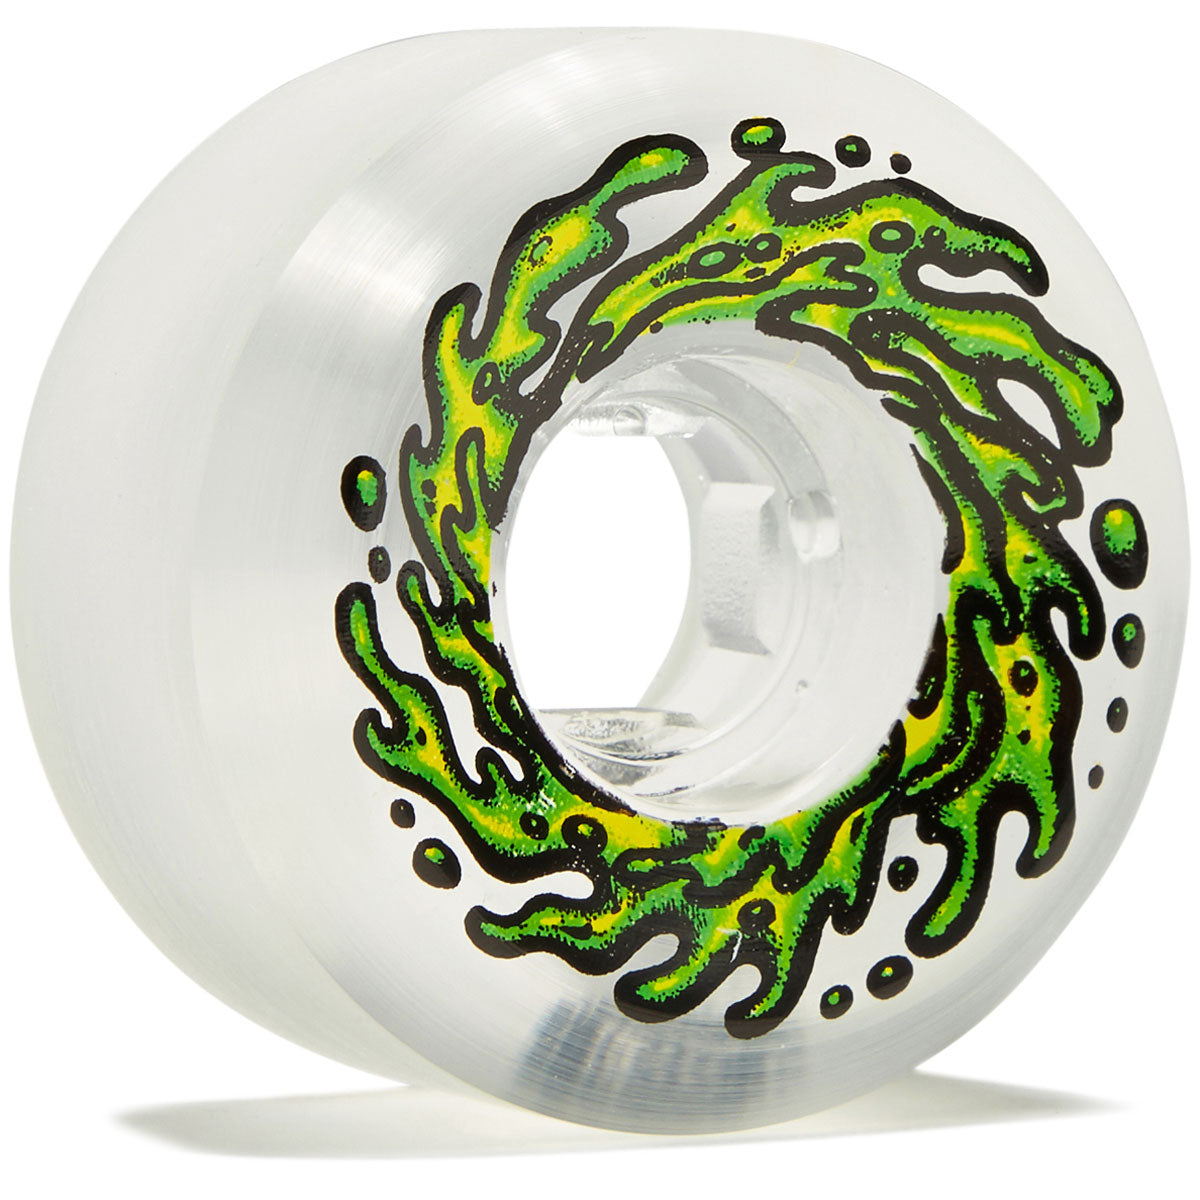 Slime Balls Mirror Vomits 99a Skateboard Wheels - Clear - 53mm image 1